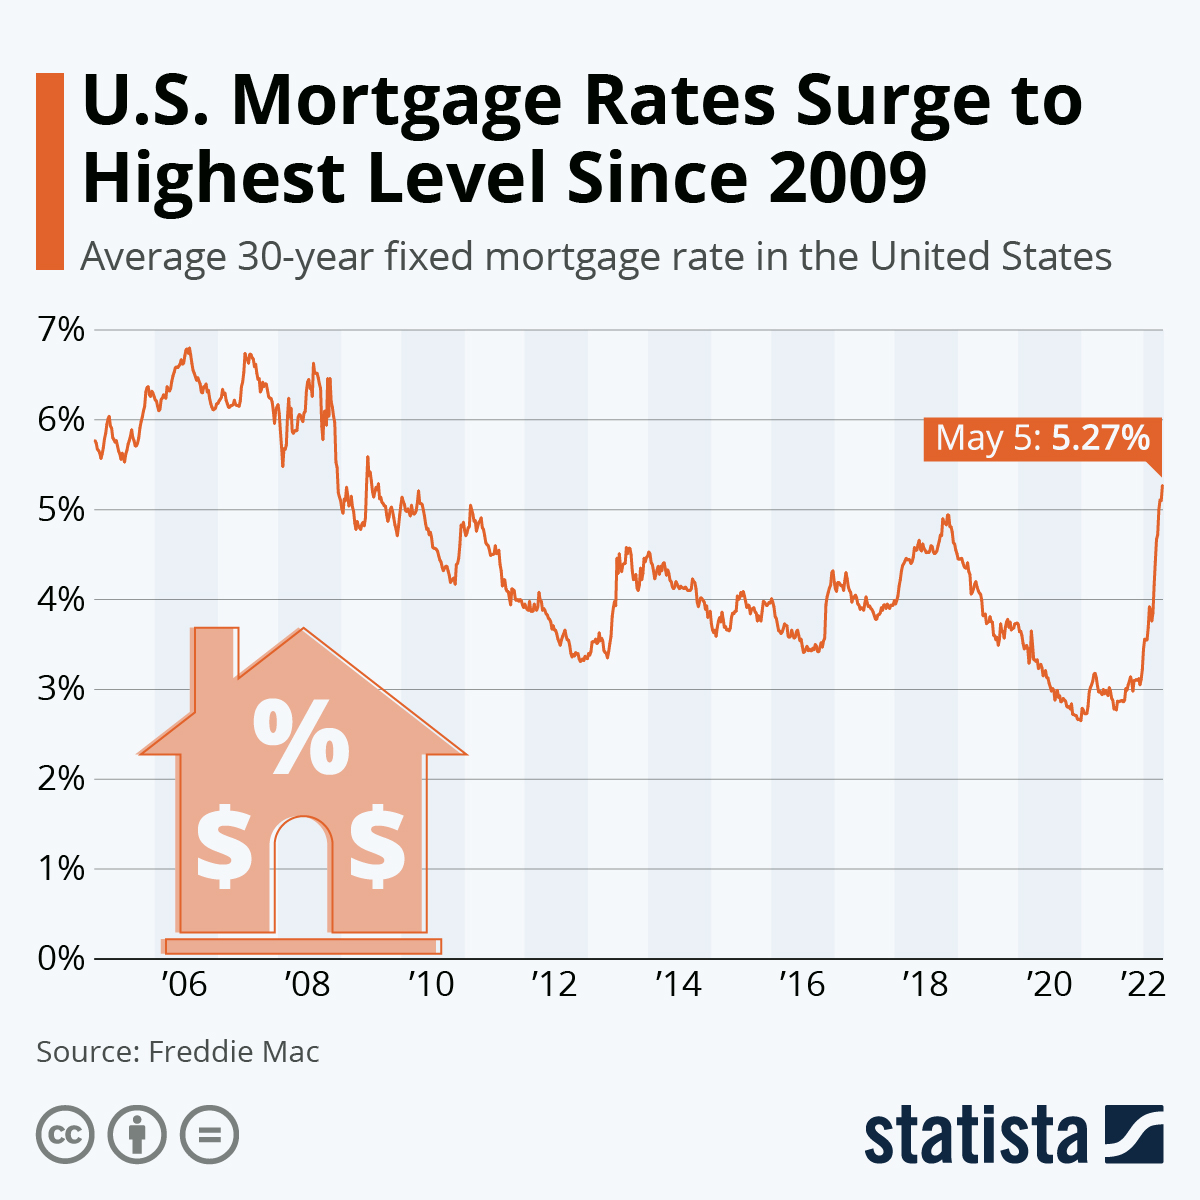 U.S. Mortgage Rates Surge to Highest Level Since 2009
